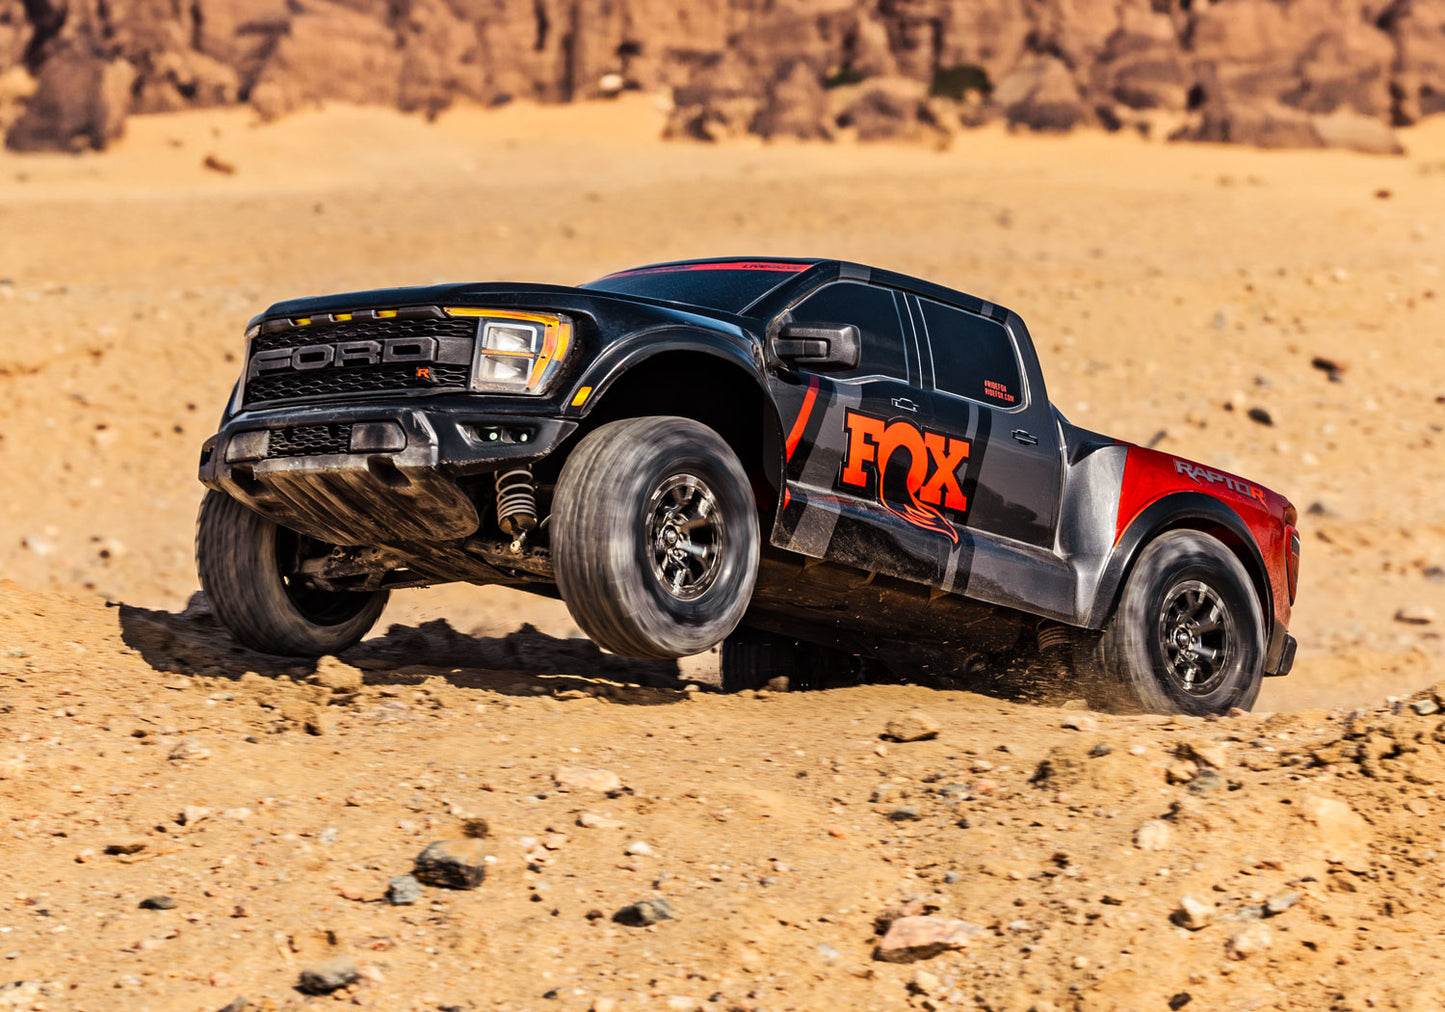 Traxxas 101076-4 Ford Raptor R: 4X4 VXL 1/10 Scale 4X4 Brushless Replica Truck AVAILABLE IN STORE ONLY